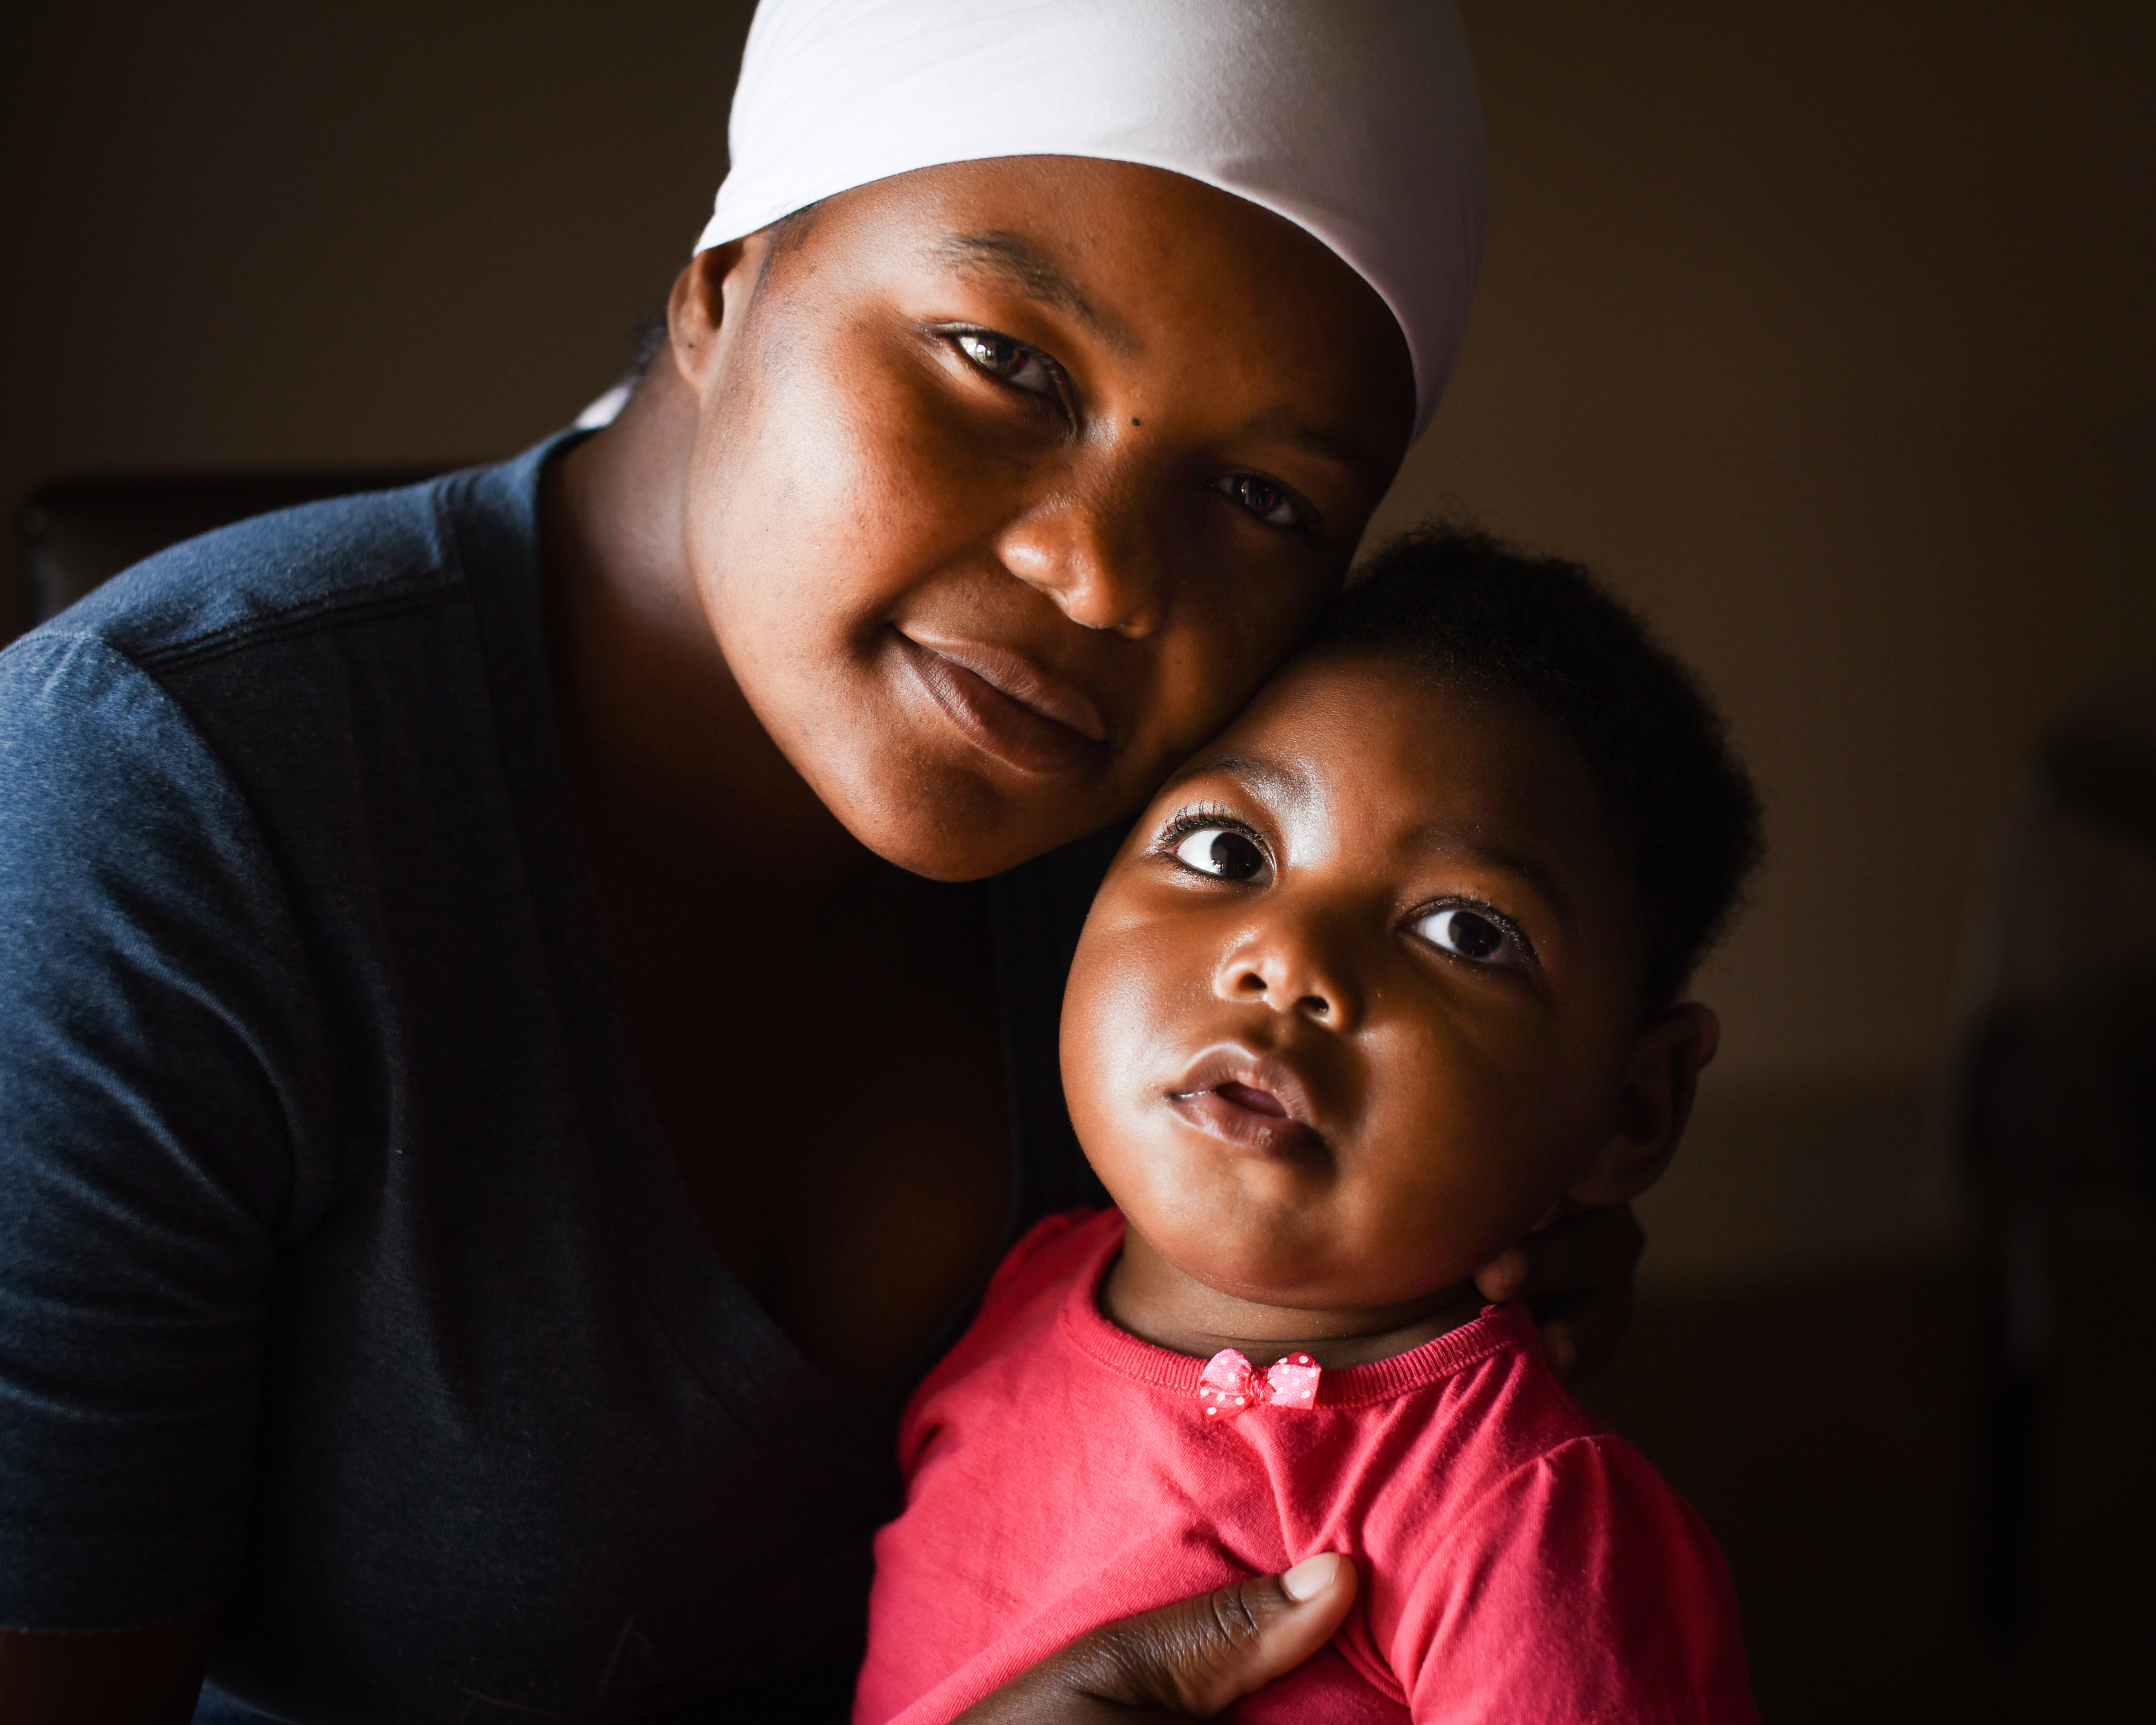 A South African mother holds her child with a disability